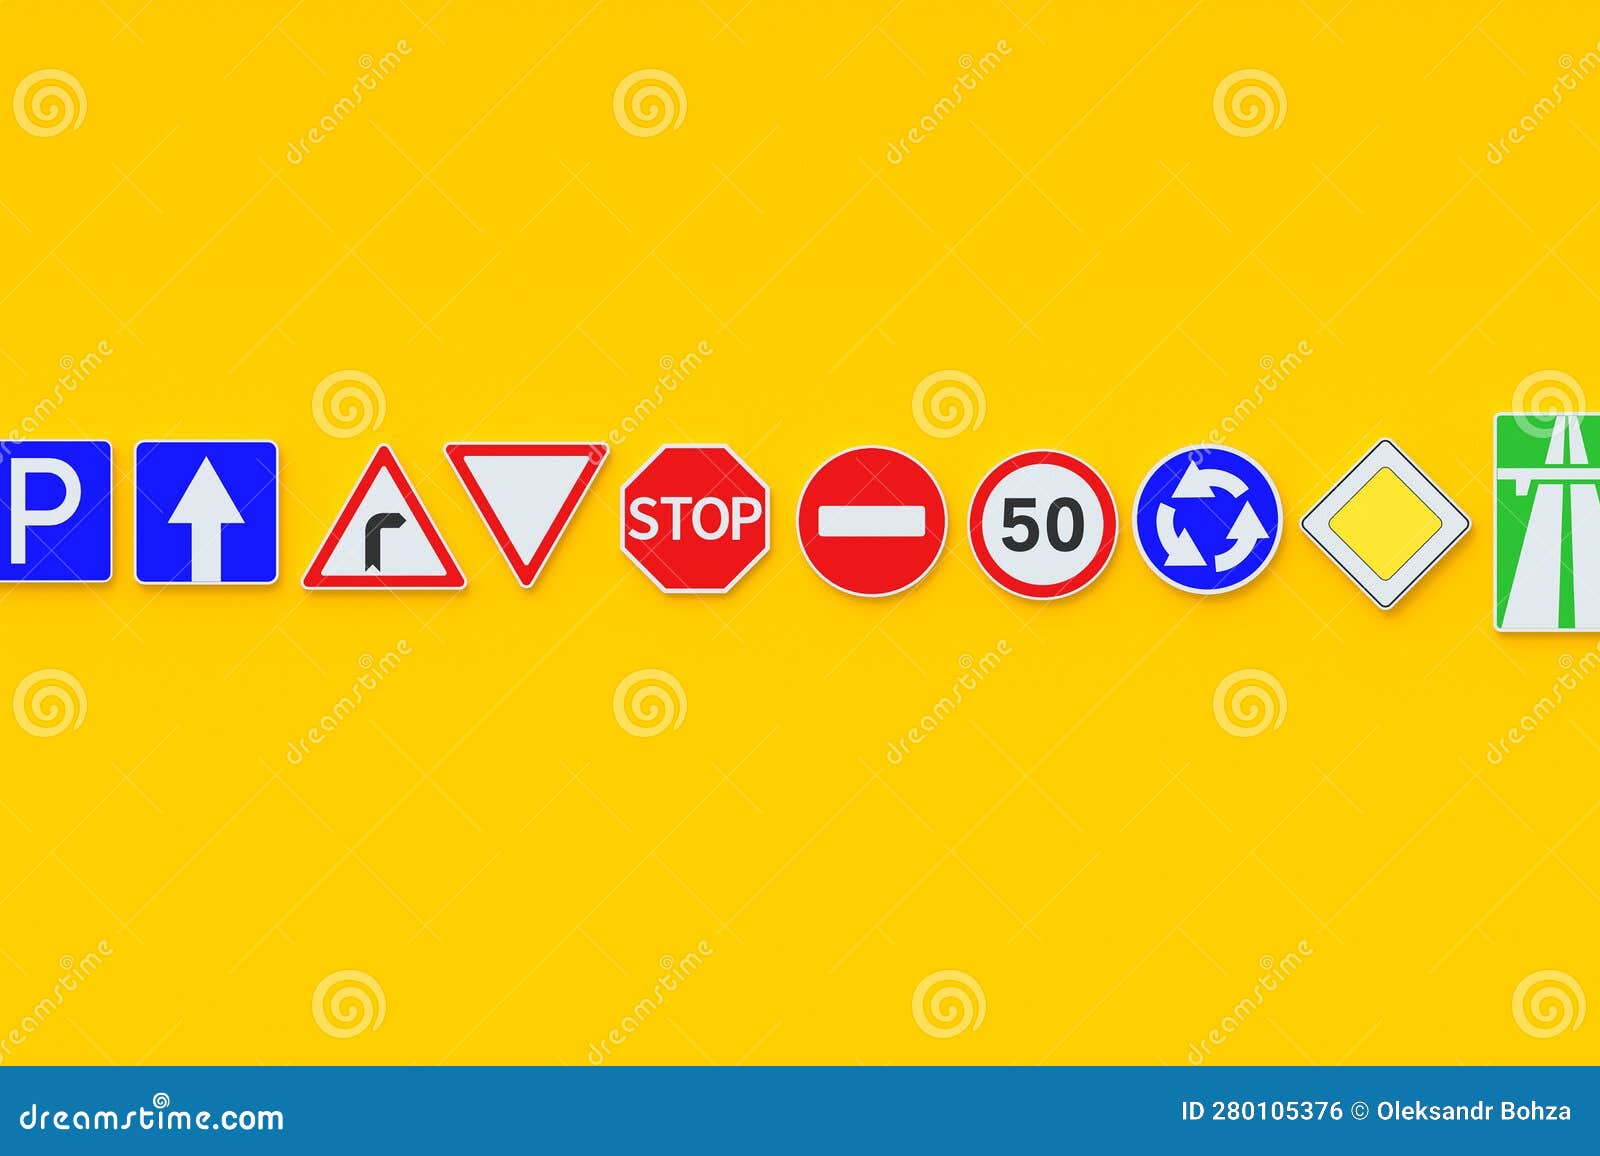 Road Signs on Orange Background. Traffic Laws. Driving School ...